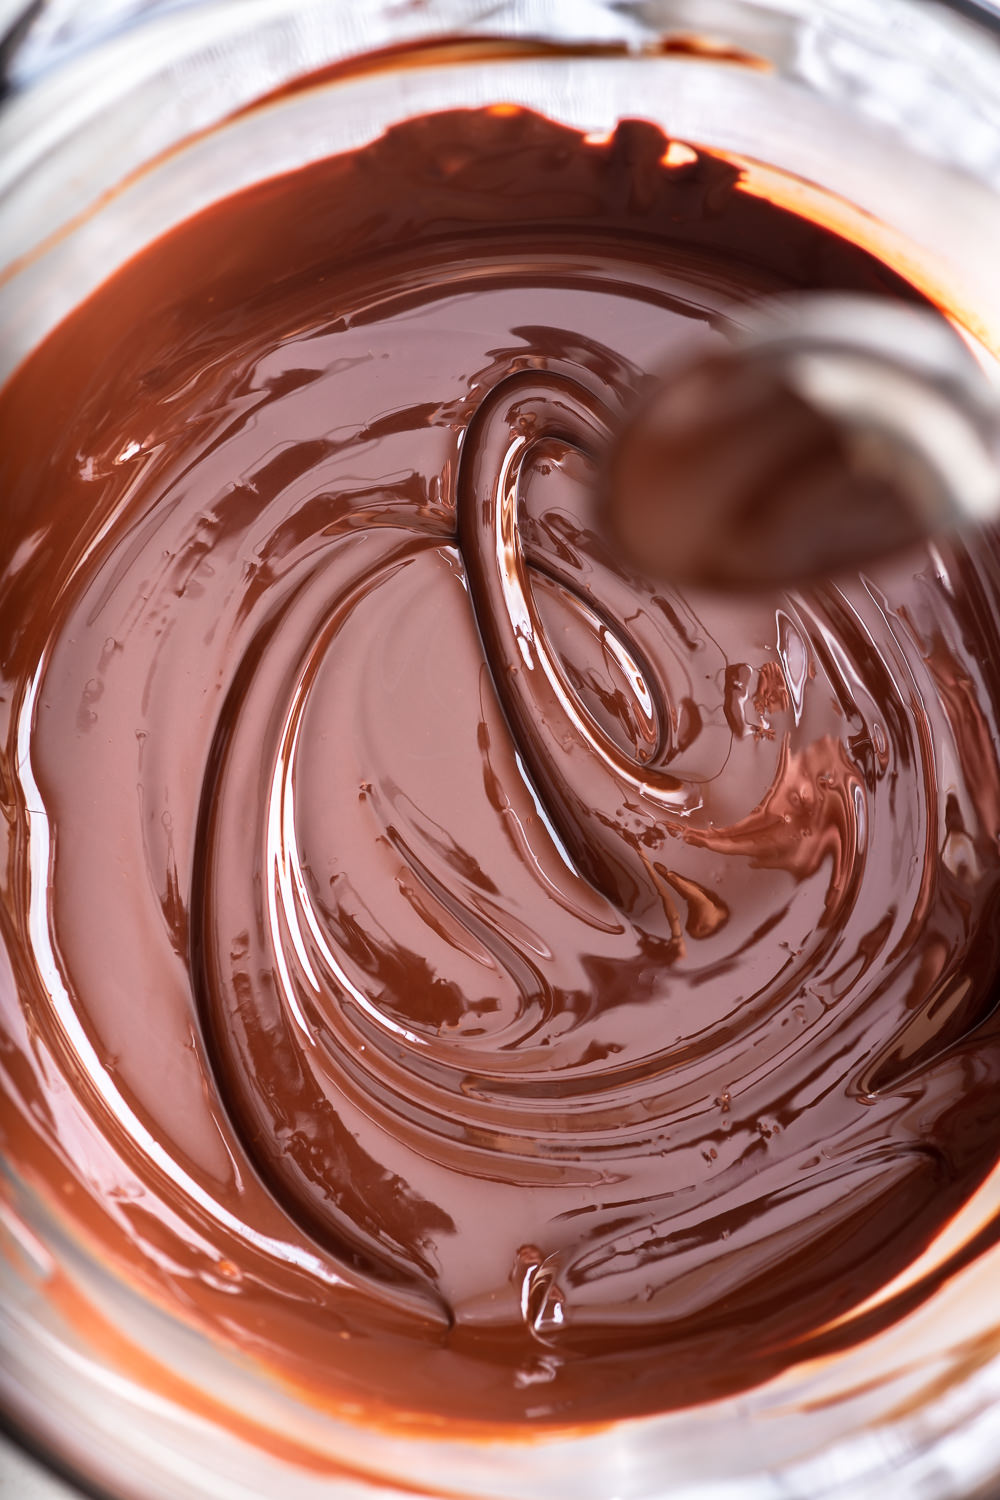 How to Temper Chocolate for Candy Making